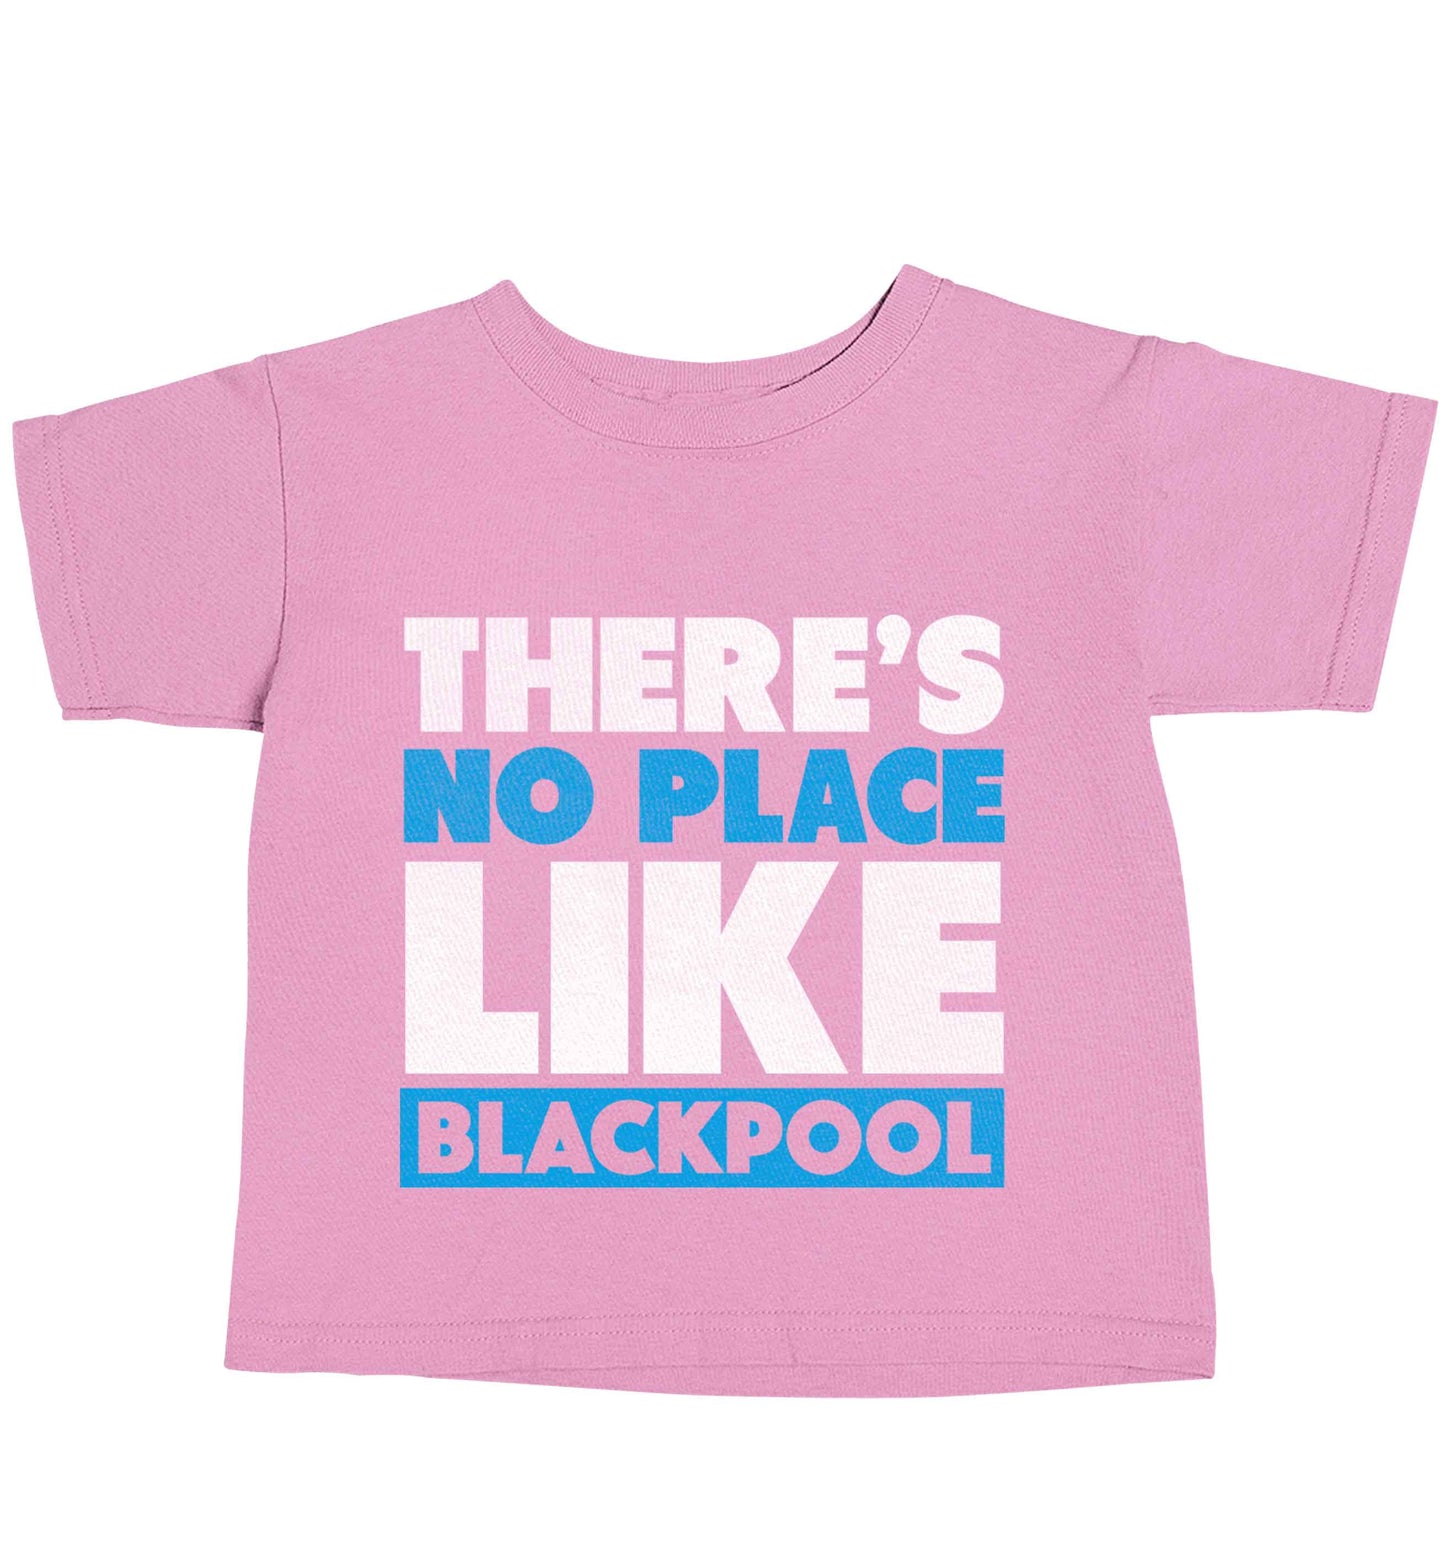 There's no place like Blackpool light pink baby toddler Tshirt 2 Years